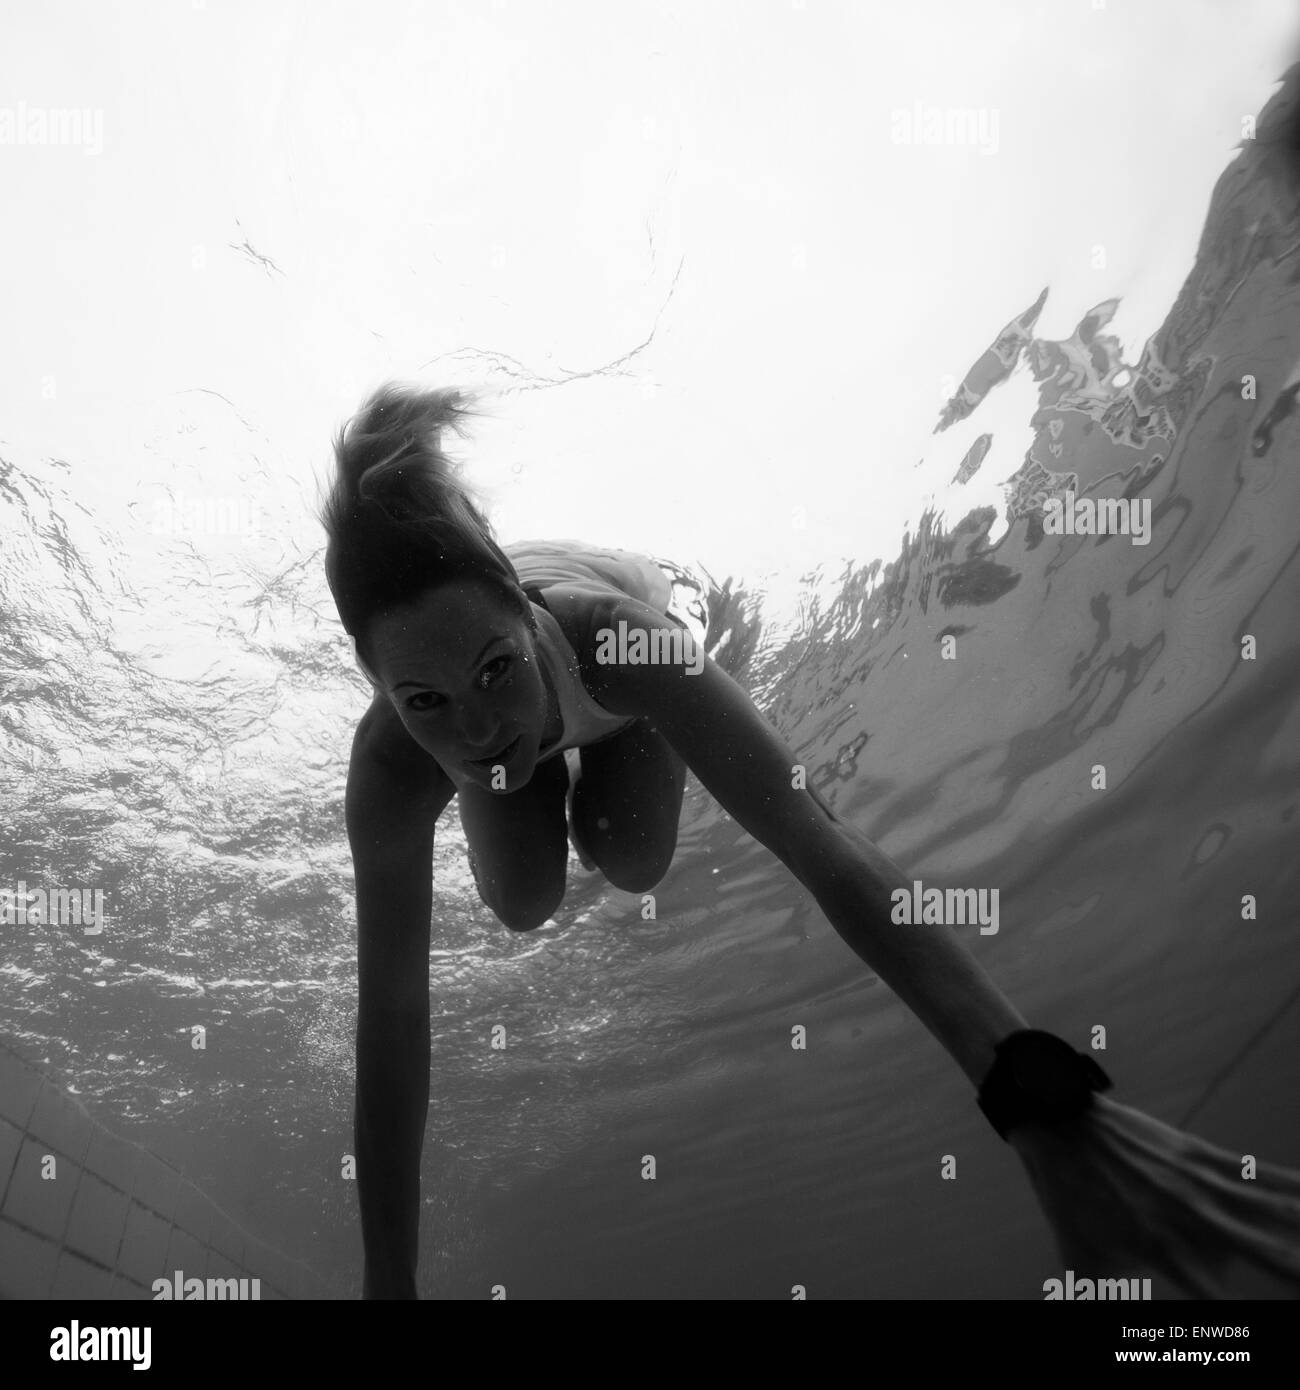 Woman freediving underwater in a pool Stock Photo